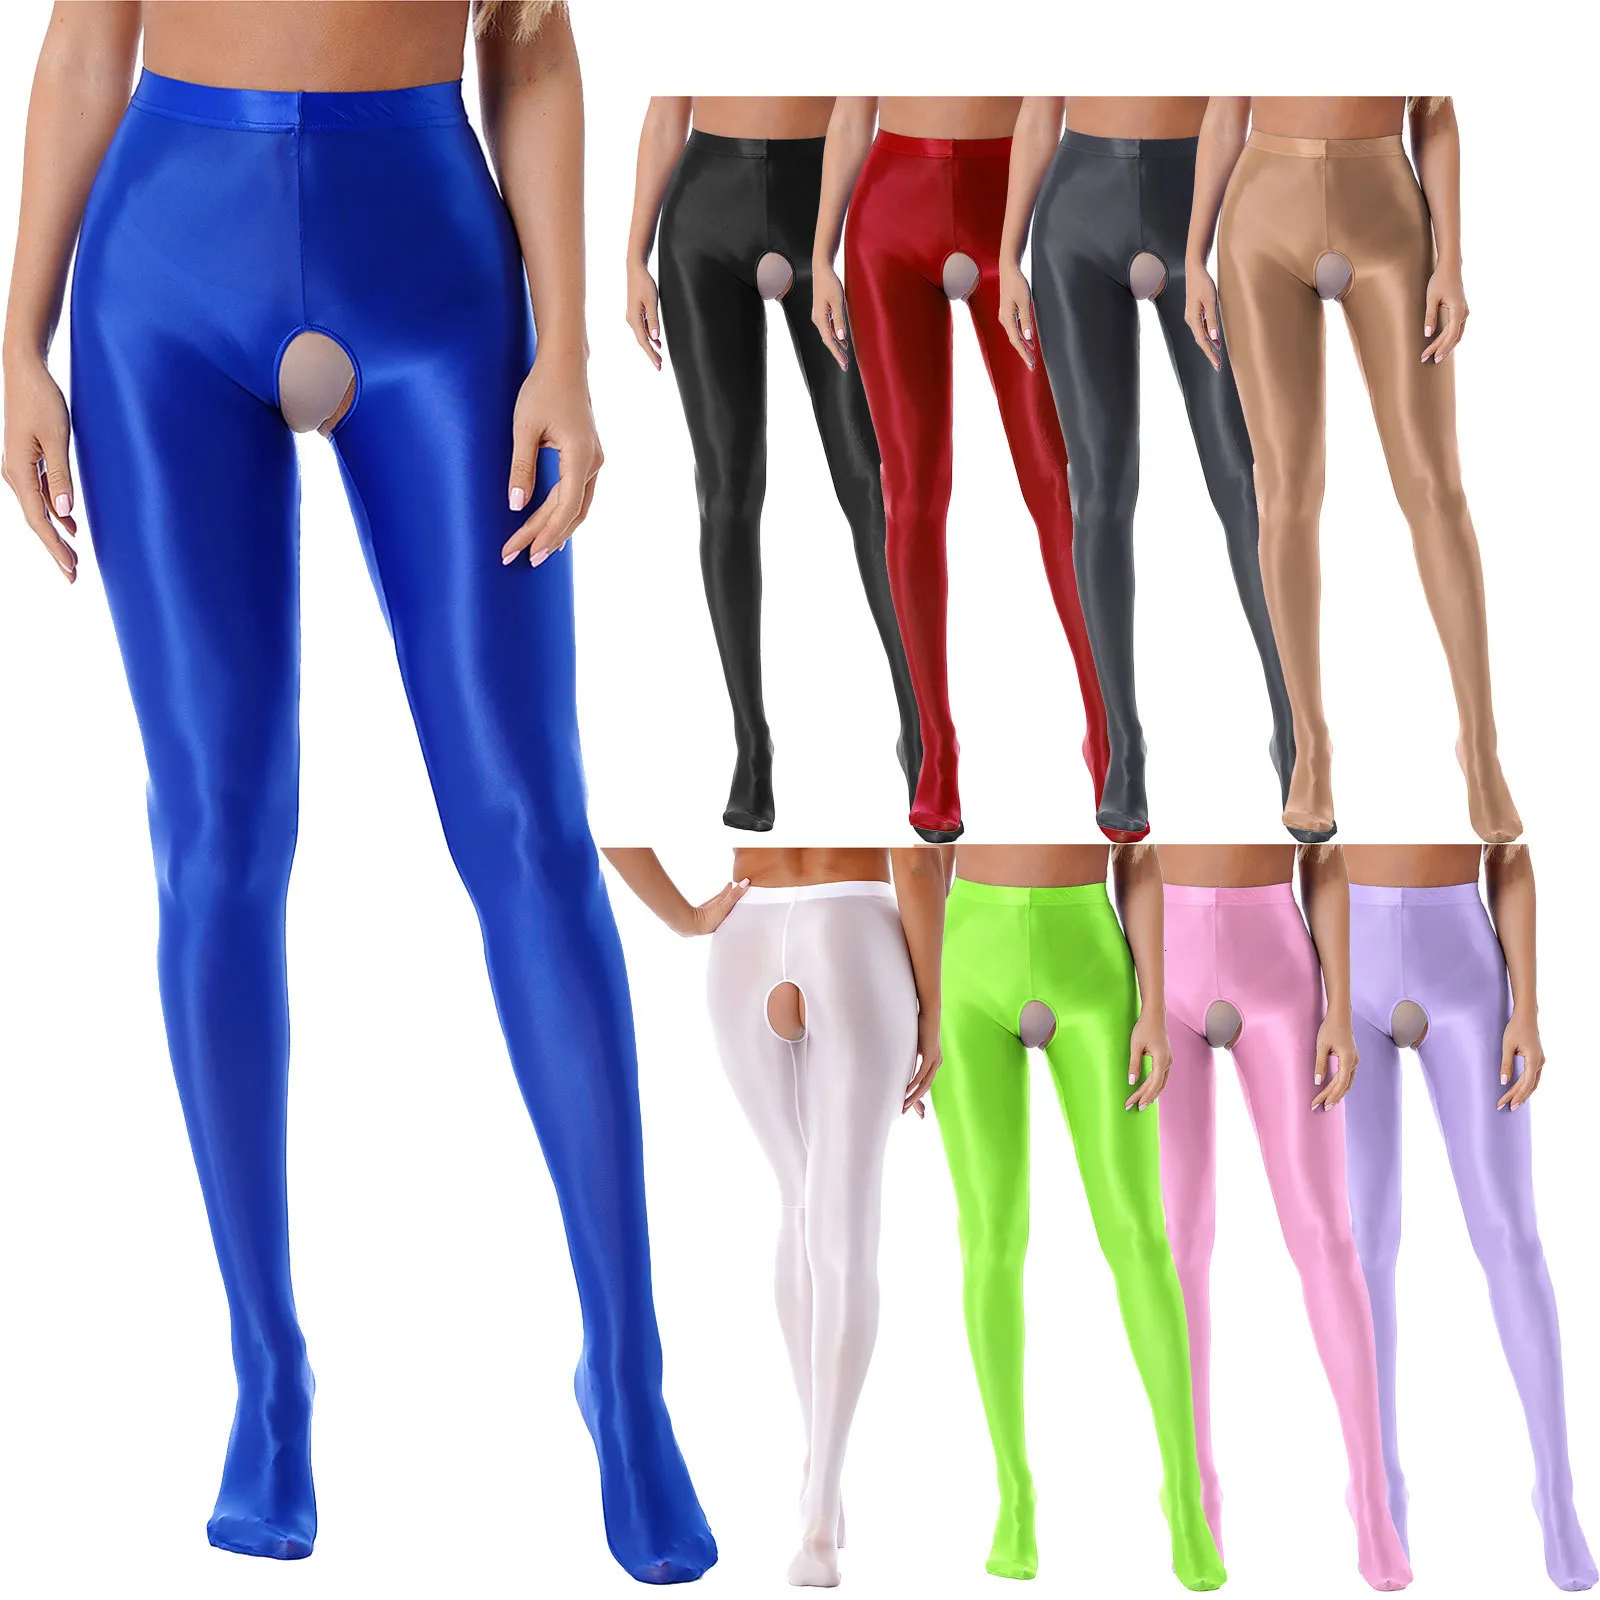 Womens Glossy Open Crotch Shorts Stretchy Smooth Leggings Slim Fit Short  Pants